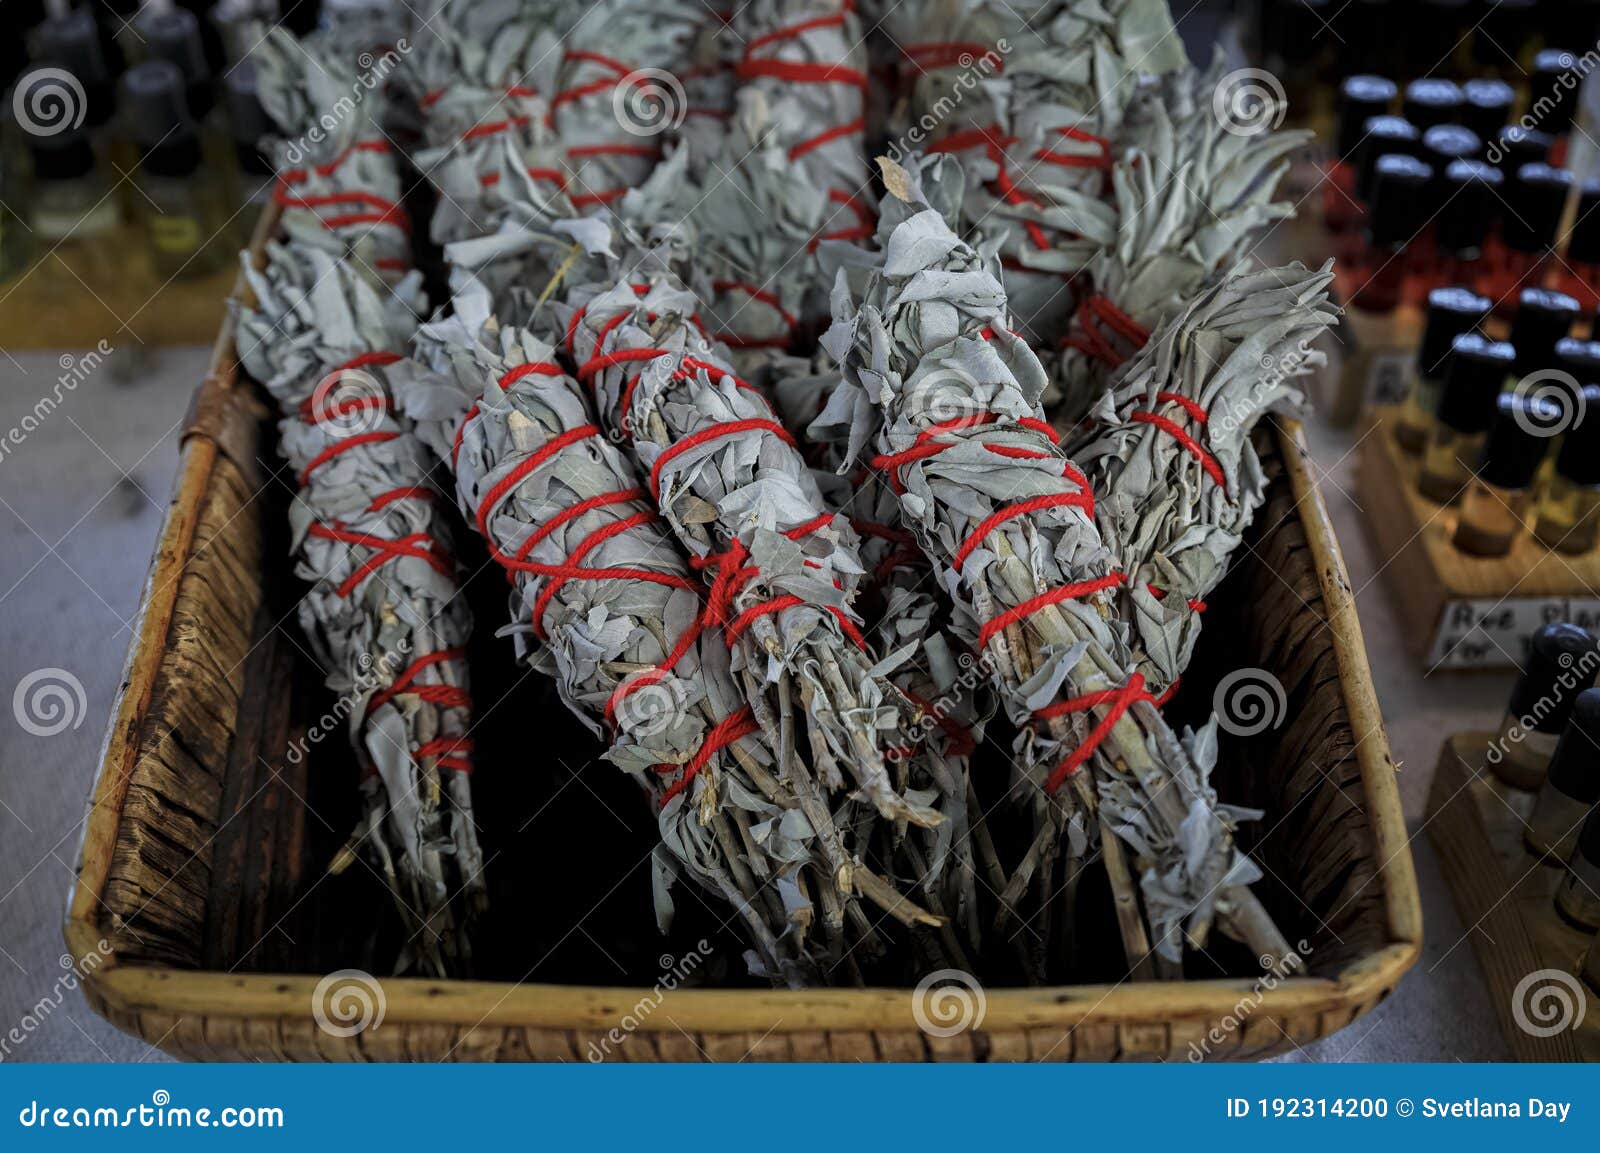 Traditional Native American Indian Ritual White Sage Smudge Sticks For Sale At A Powwow, San